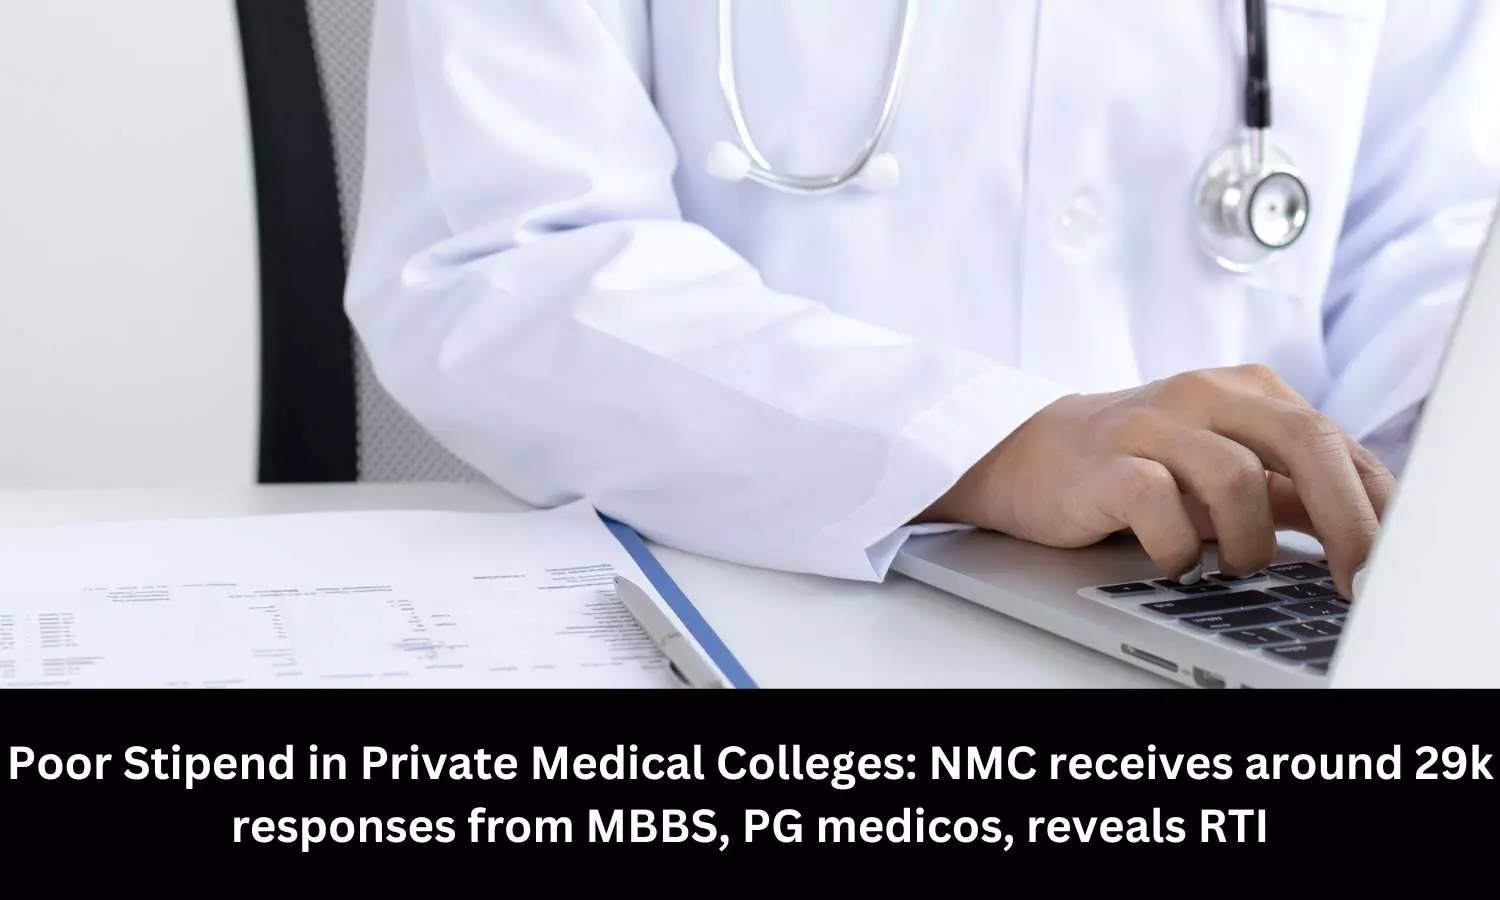 Poor stipend in private medical colleges: NMC gets around 29k responses from MBBS, PG medicos, reveals RTI